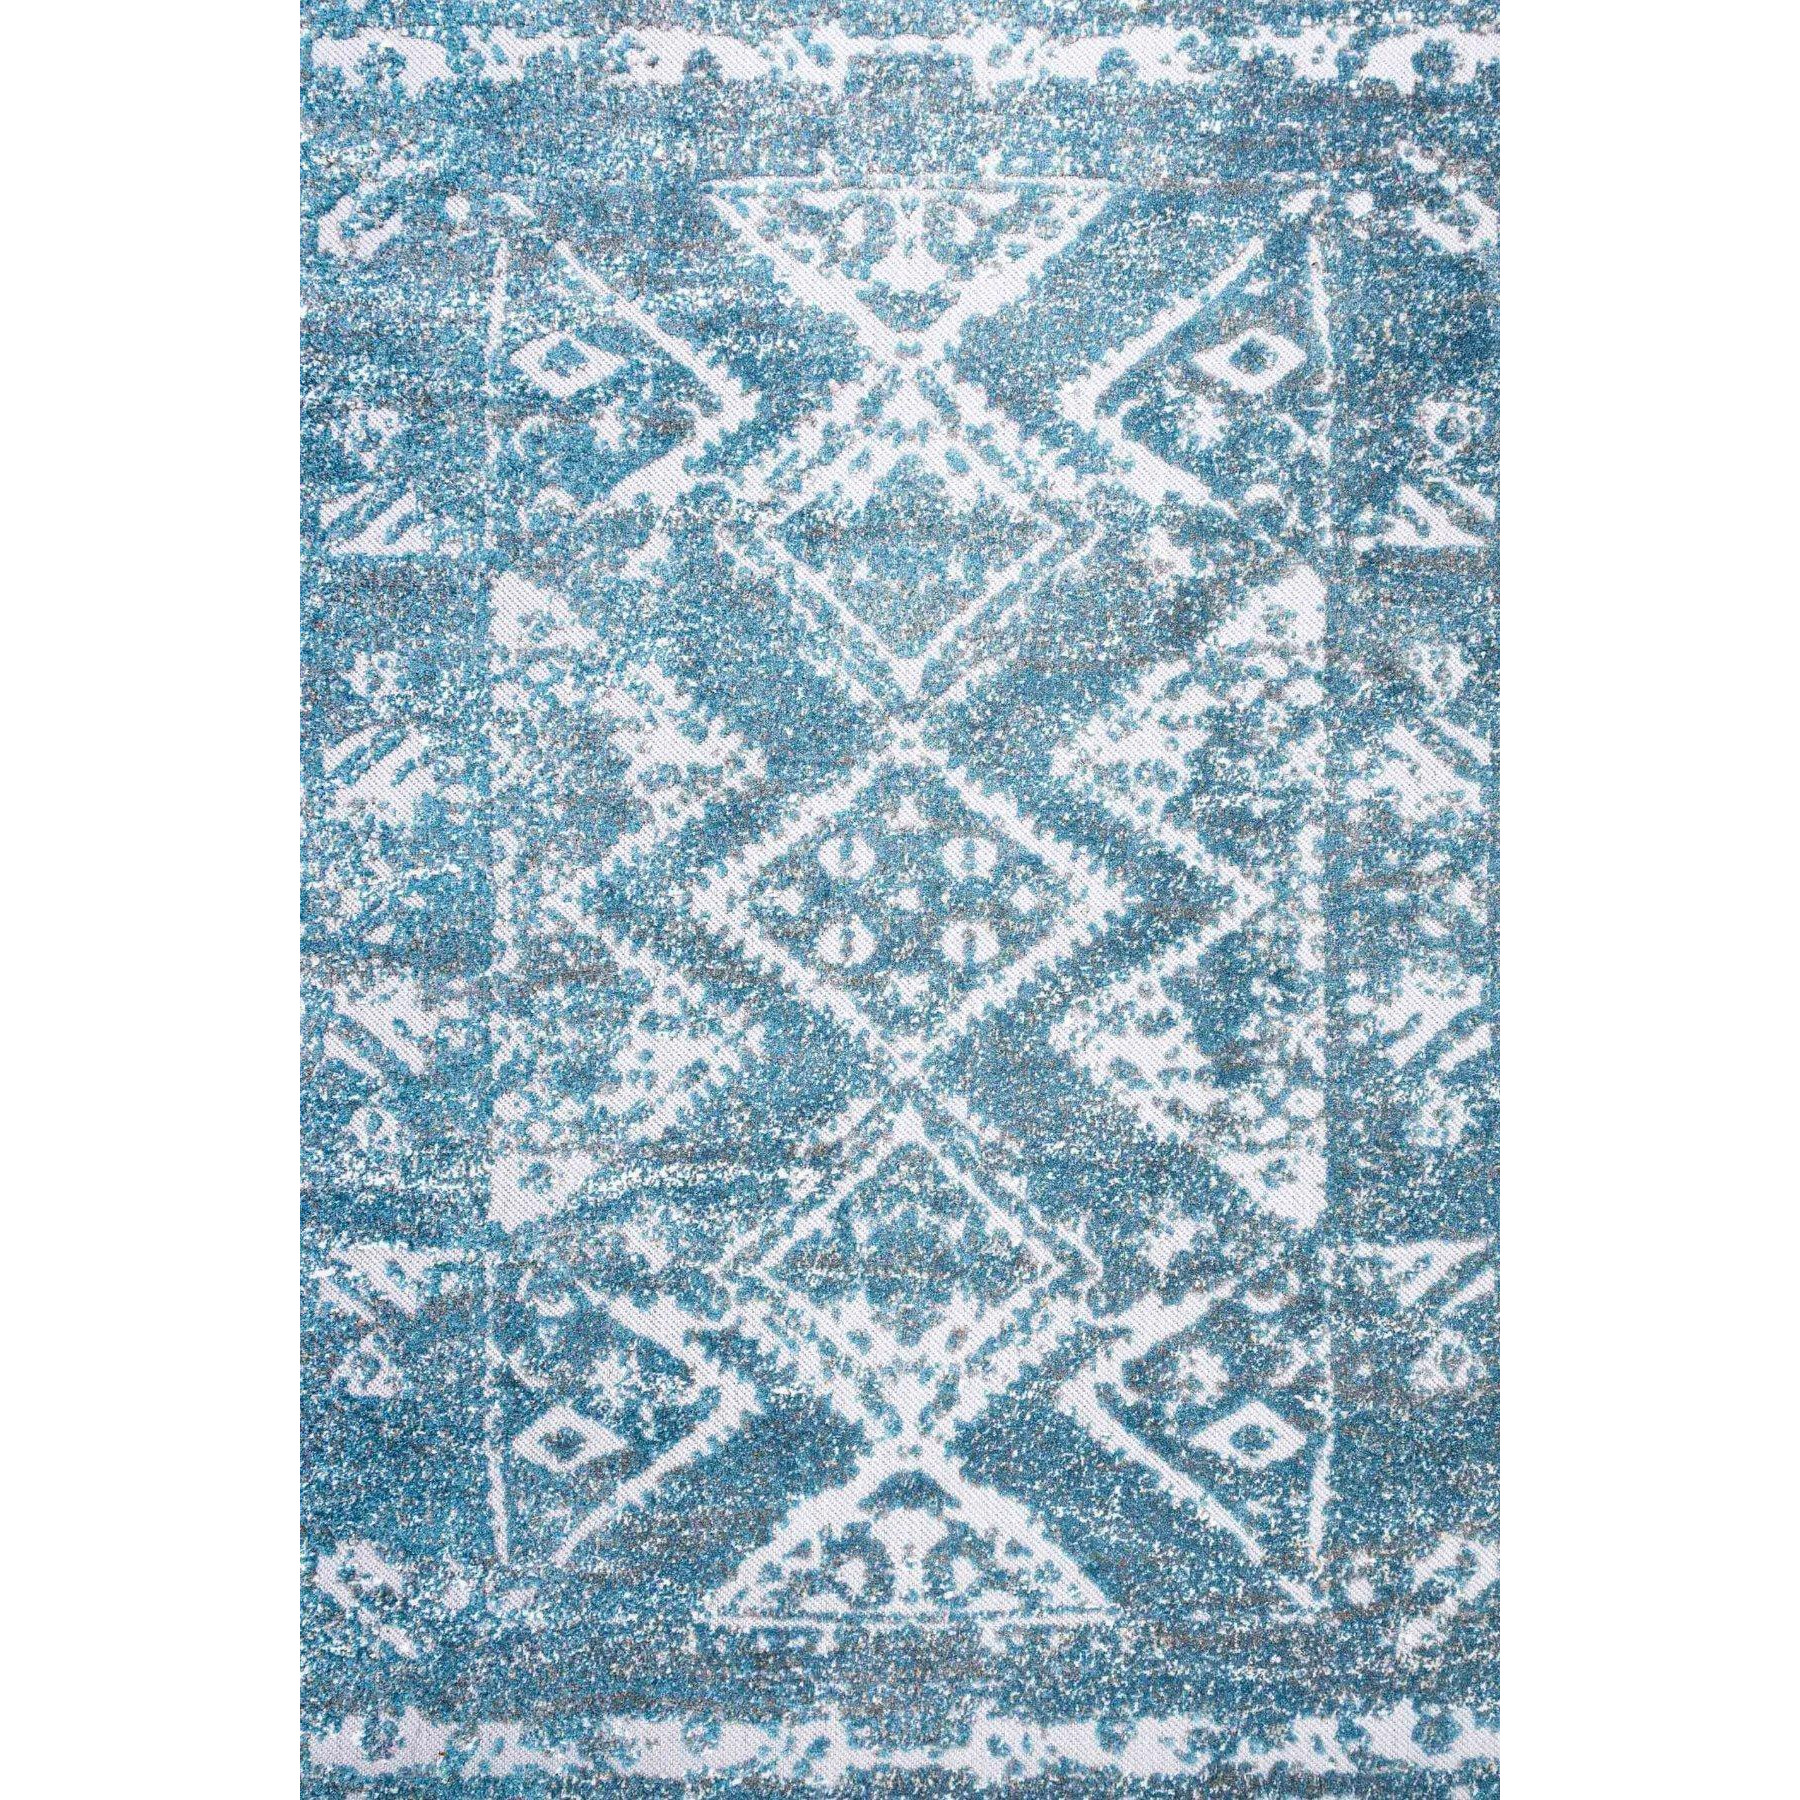 Distressed Blue Outdoor, Garden and Patio Area Rug - image 1